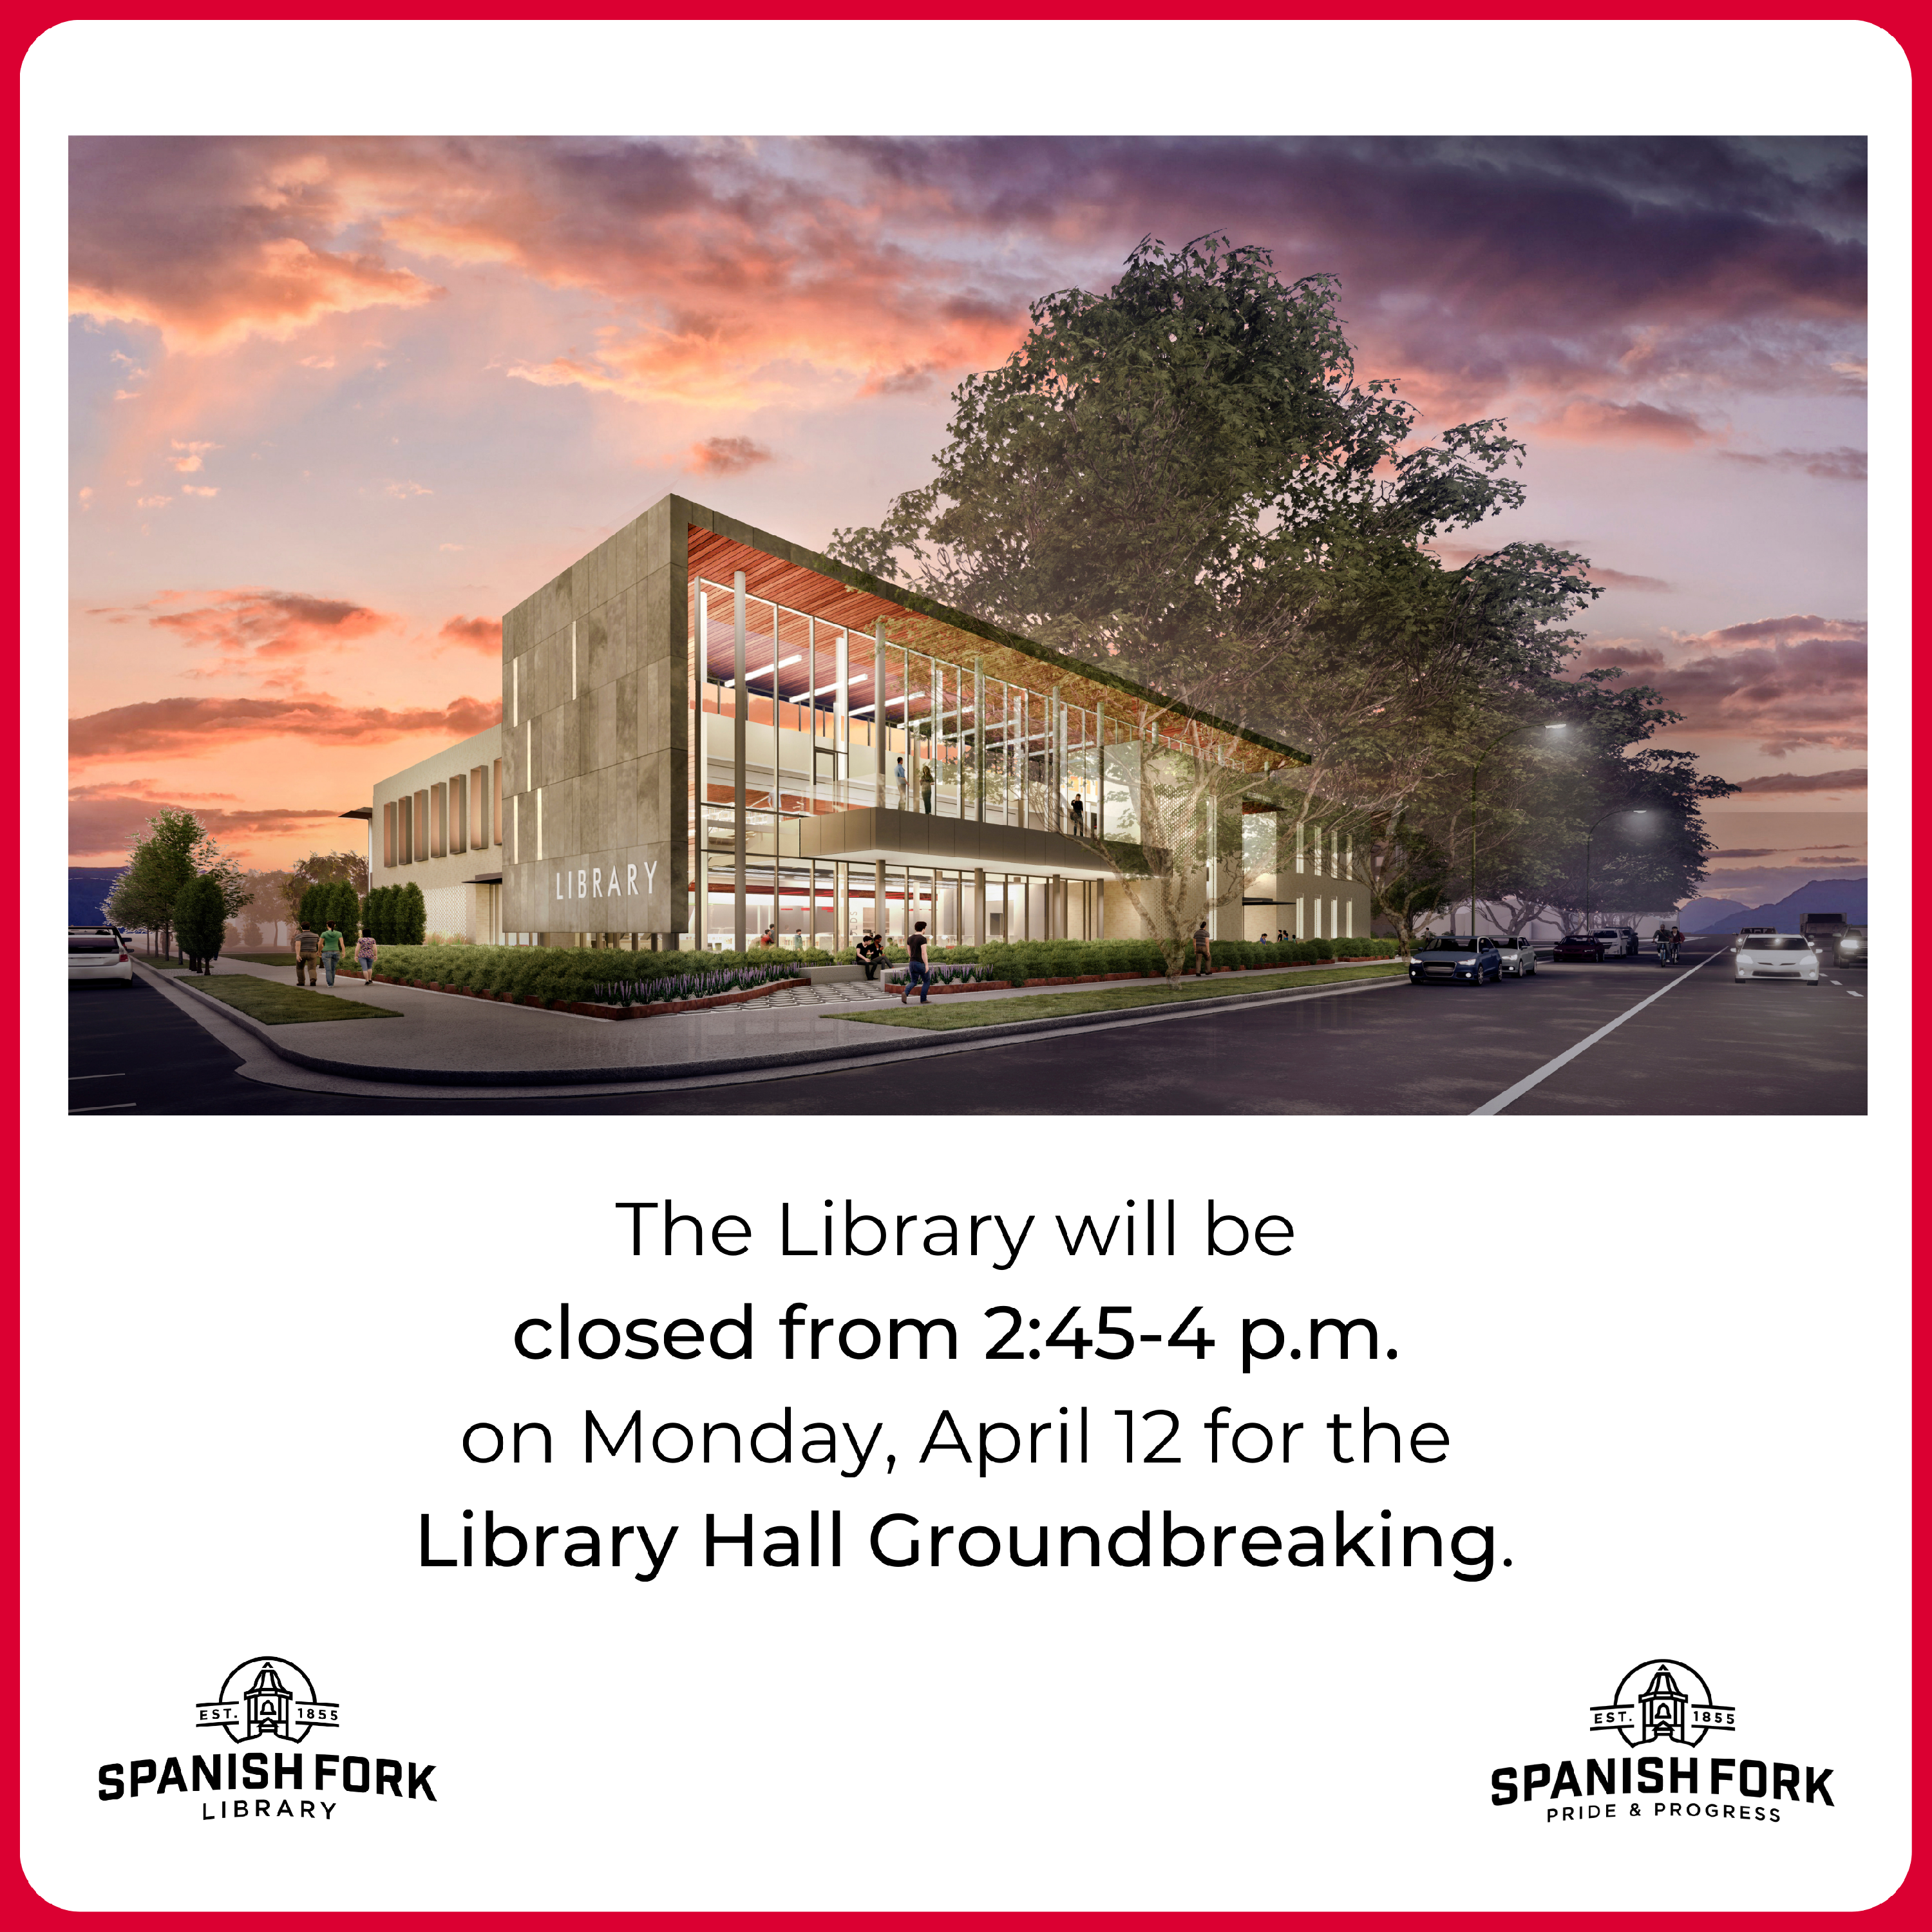 The Library will be closed from 2:45 to 4 p.m. on Monday, April 12 for the Library Hall Groundbreaking.